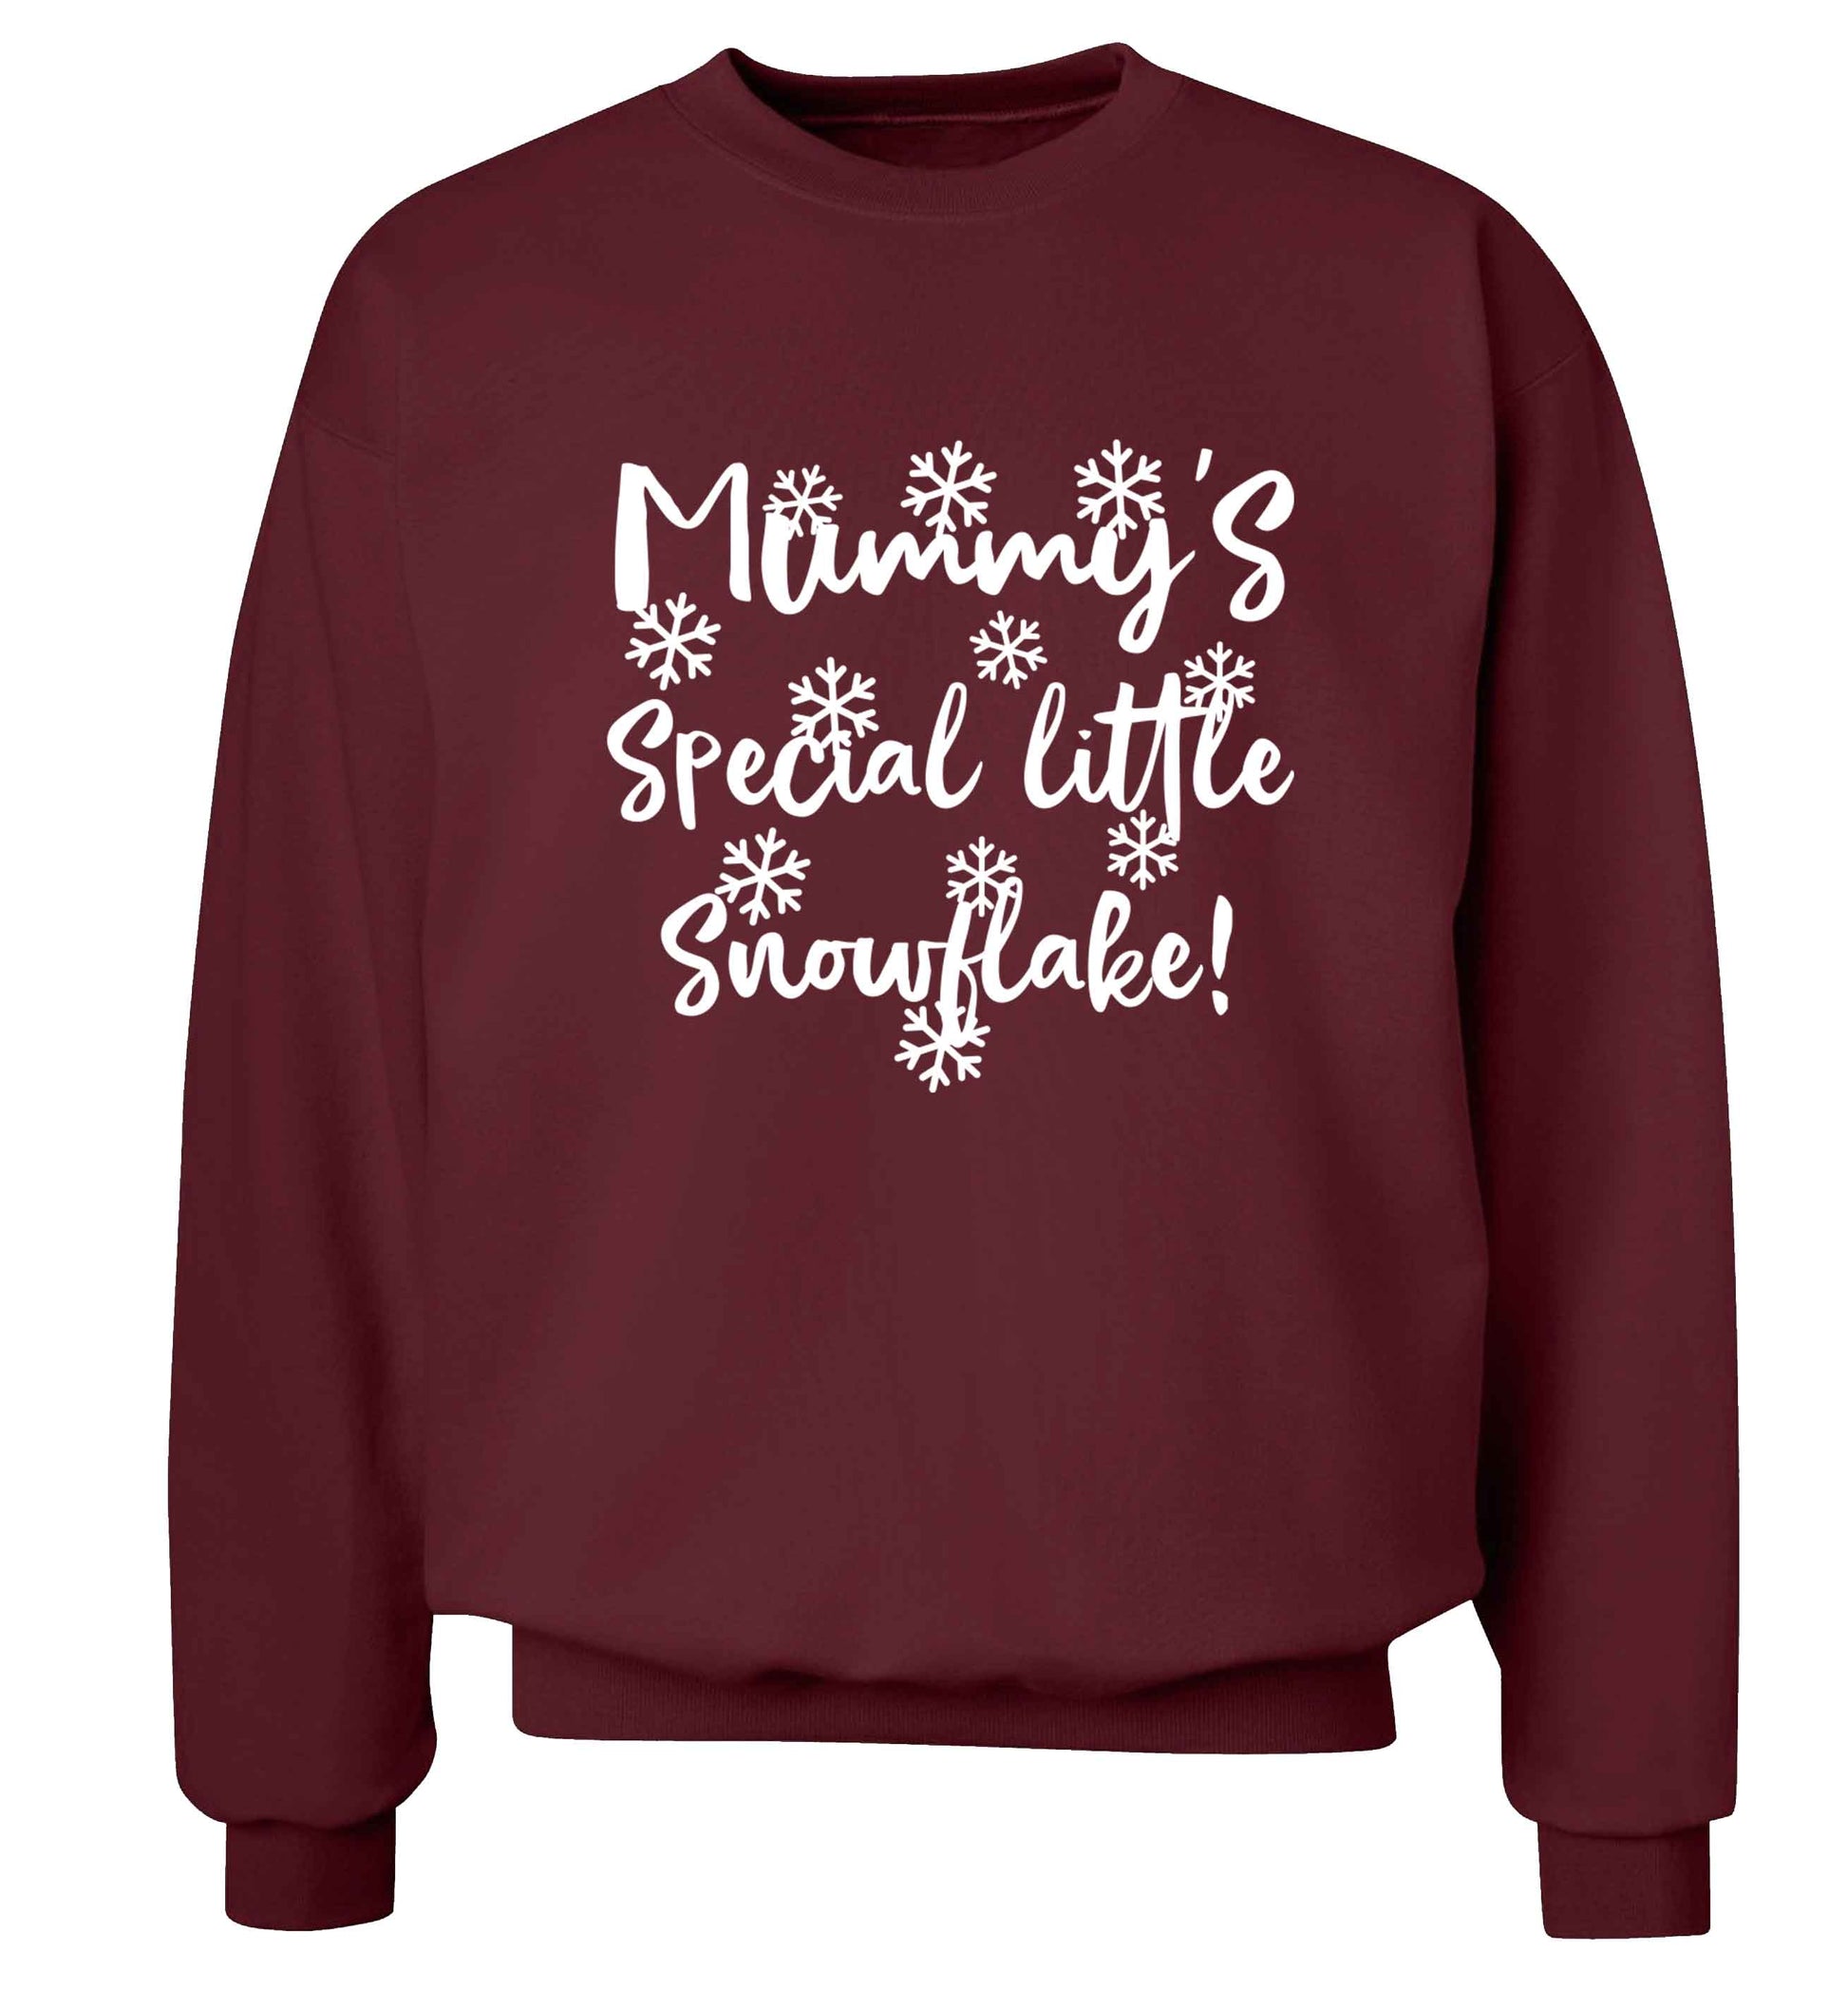 Mummy's special little snowflake Adult's unisex maroon Sweater 2XL